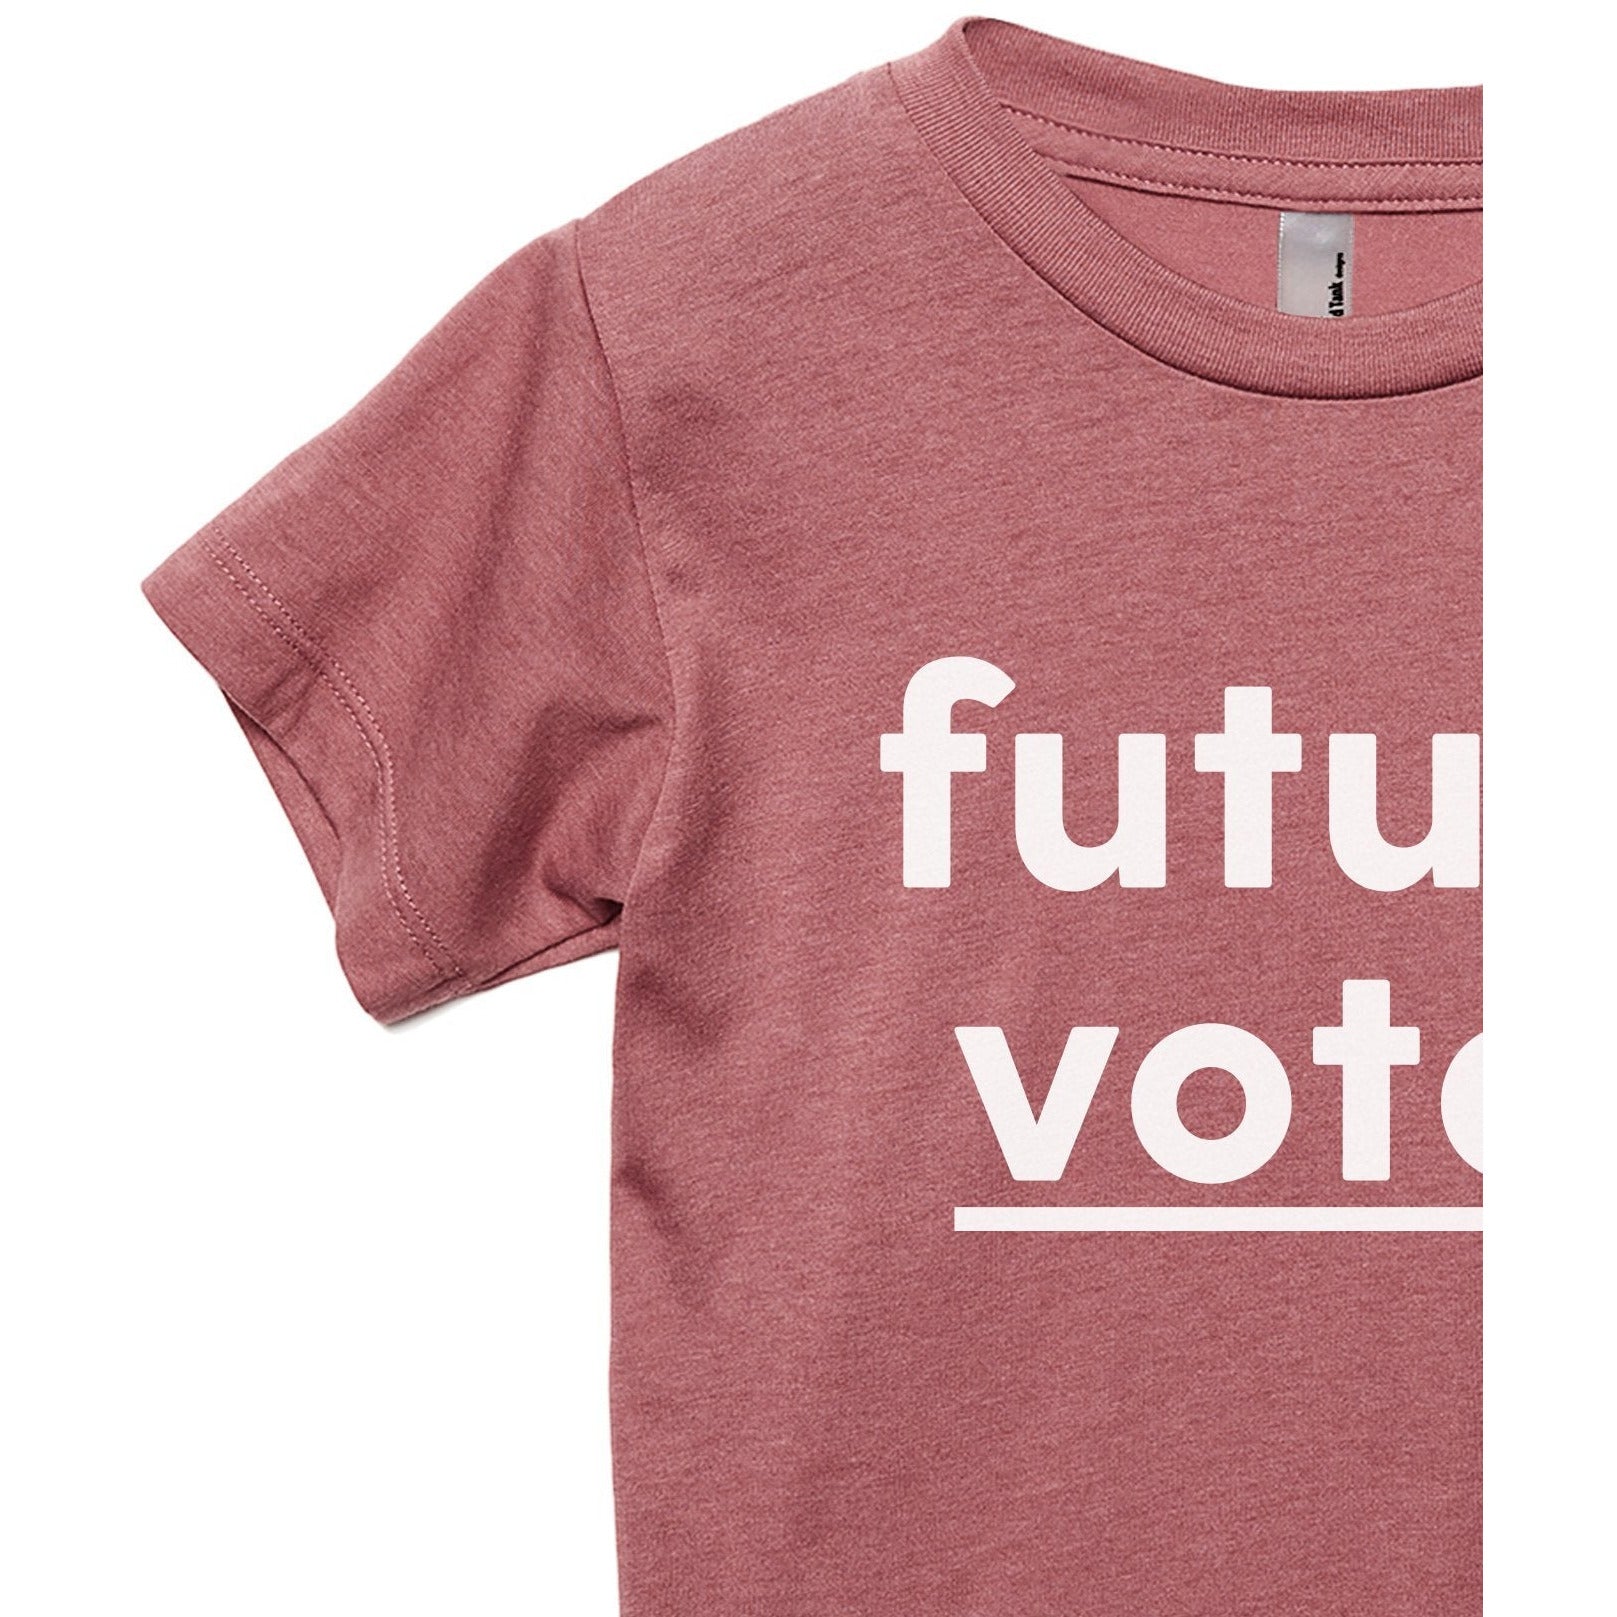 Future Voter Toddler's Go-To Crewneck Tee Heather Grey Close Up Sleeves Collar Details
